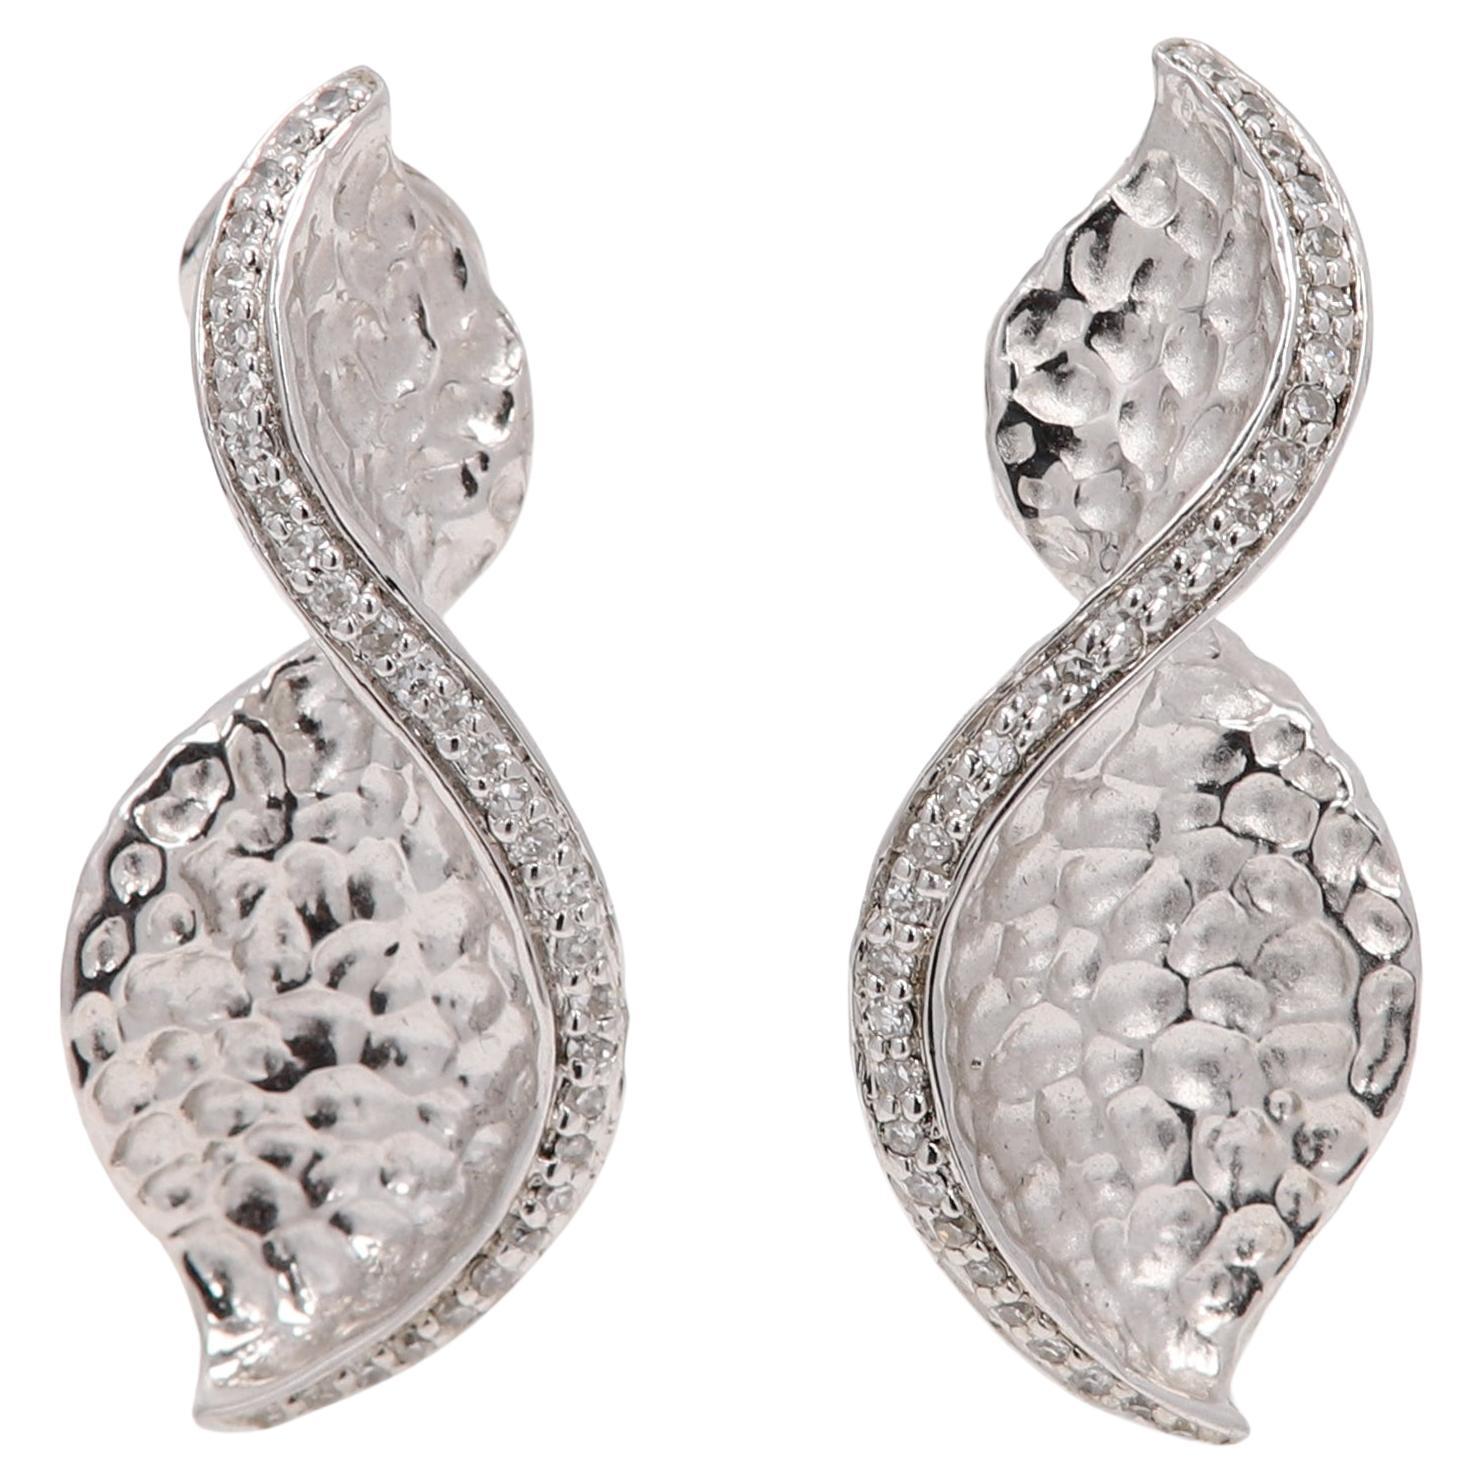 Twisted Design Earrings Sterling Silver and Diamonds